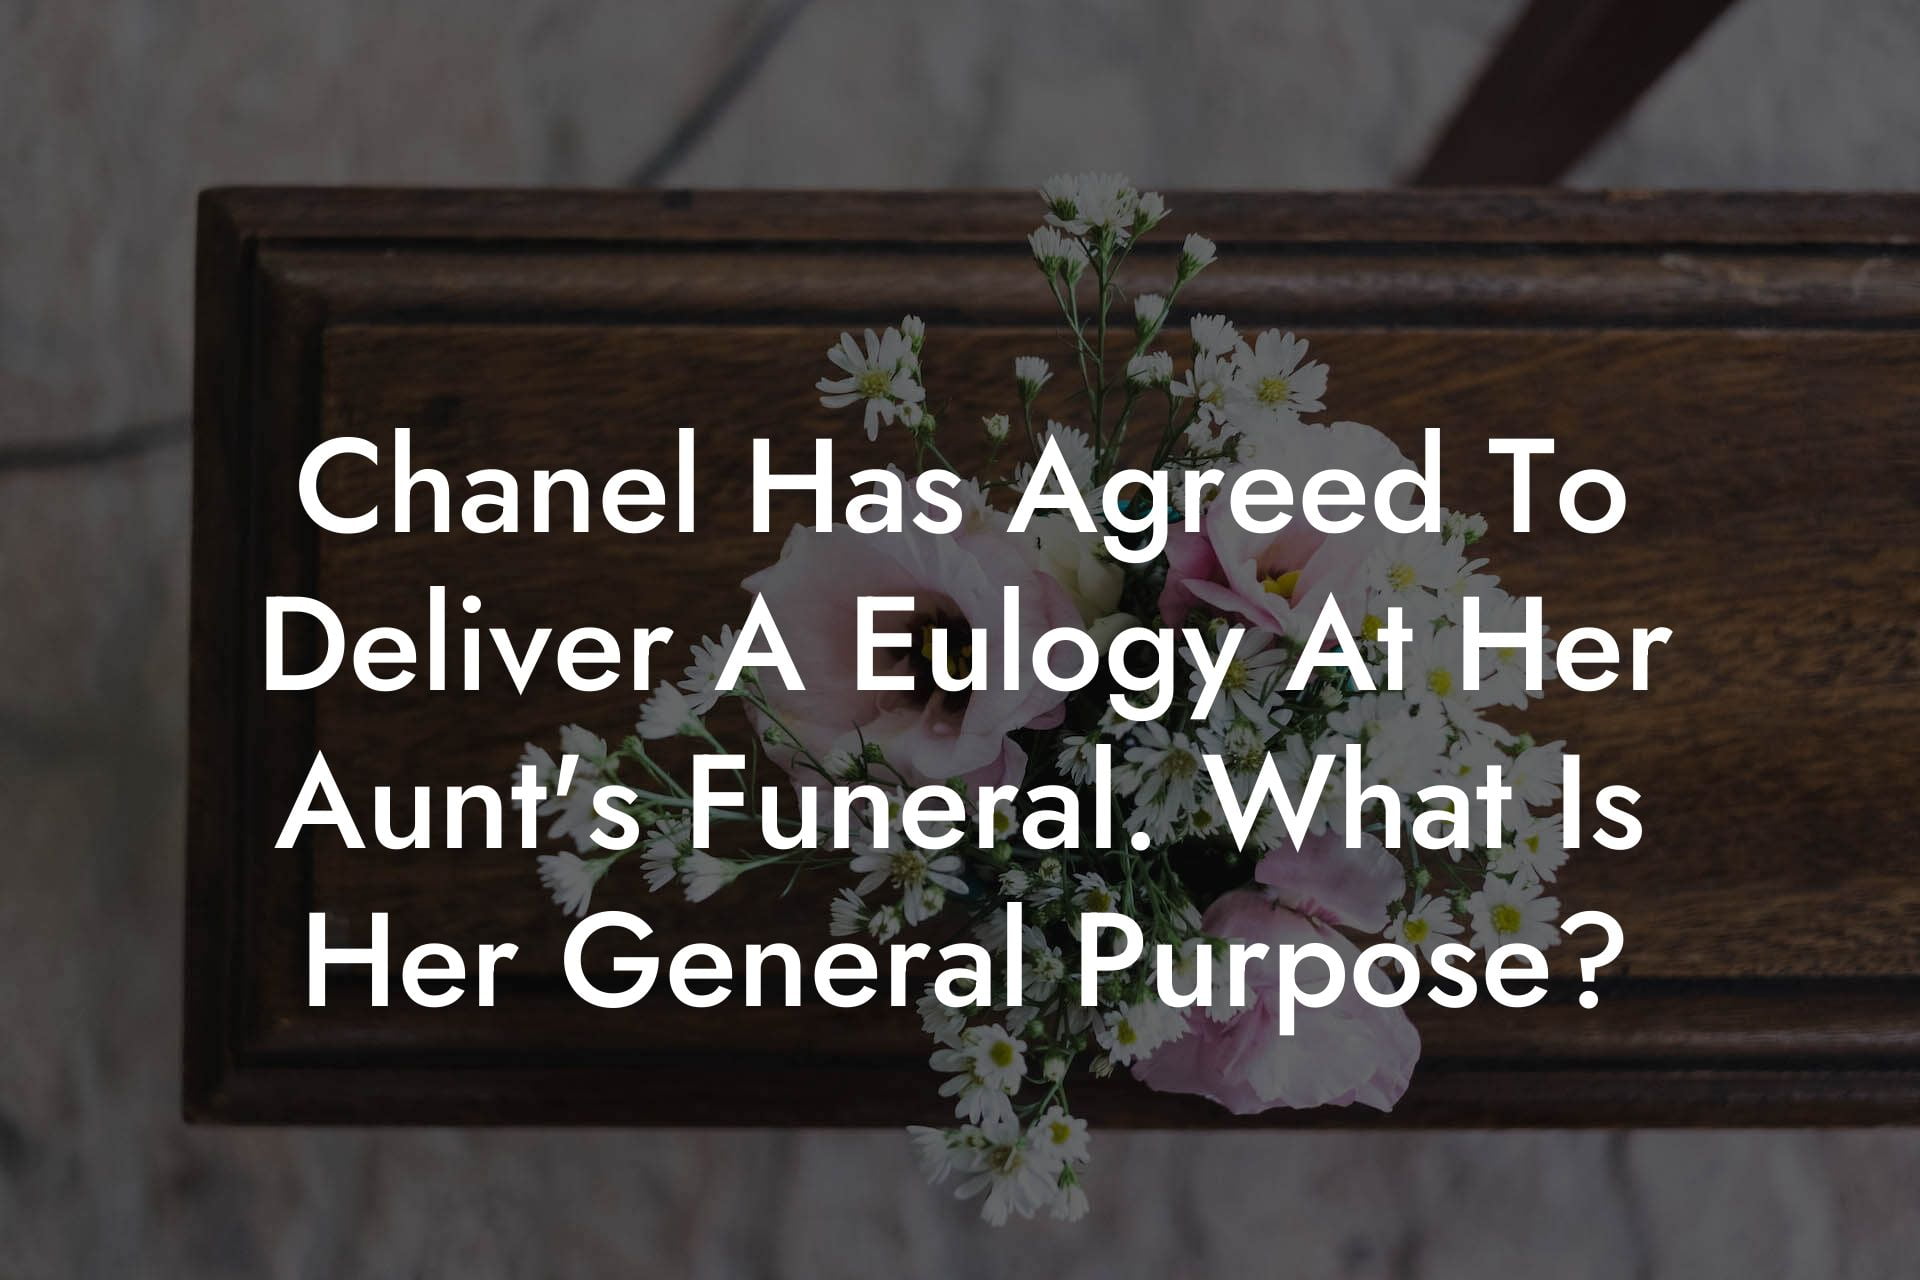 Chanel Has Agreed To Deliver A Eulogy At Her Aunt's Funeral. What Is Her General Purpose?